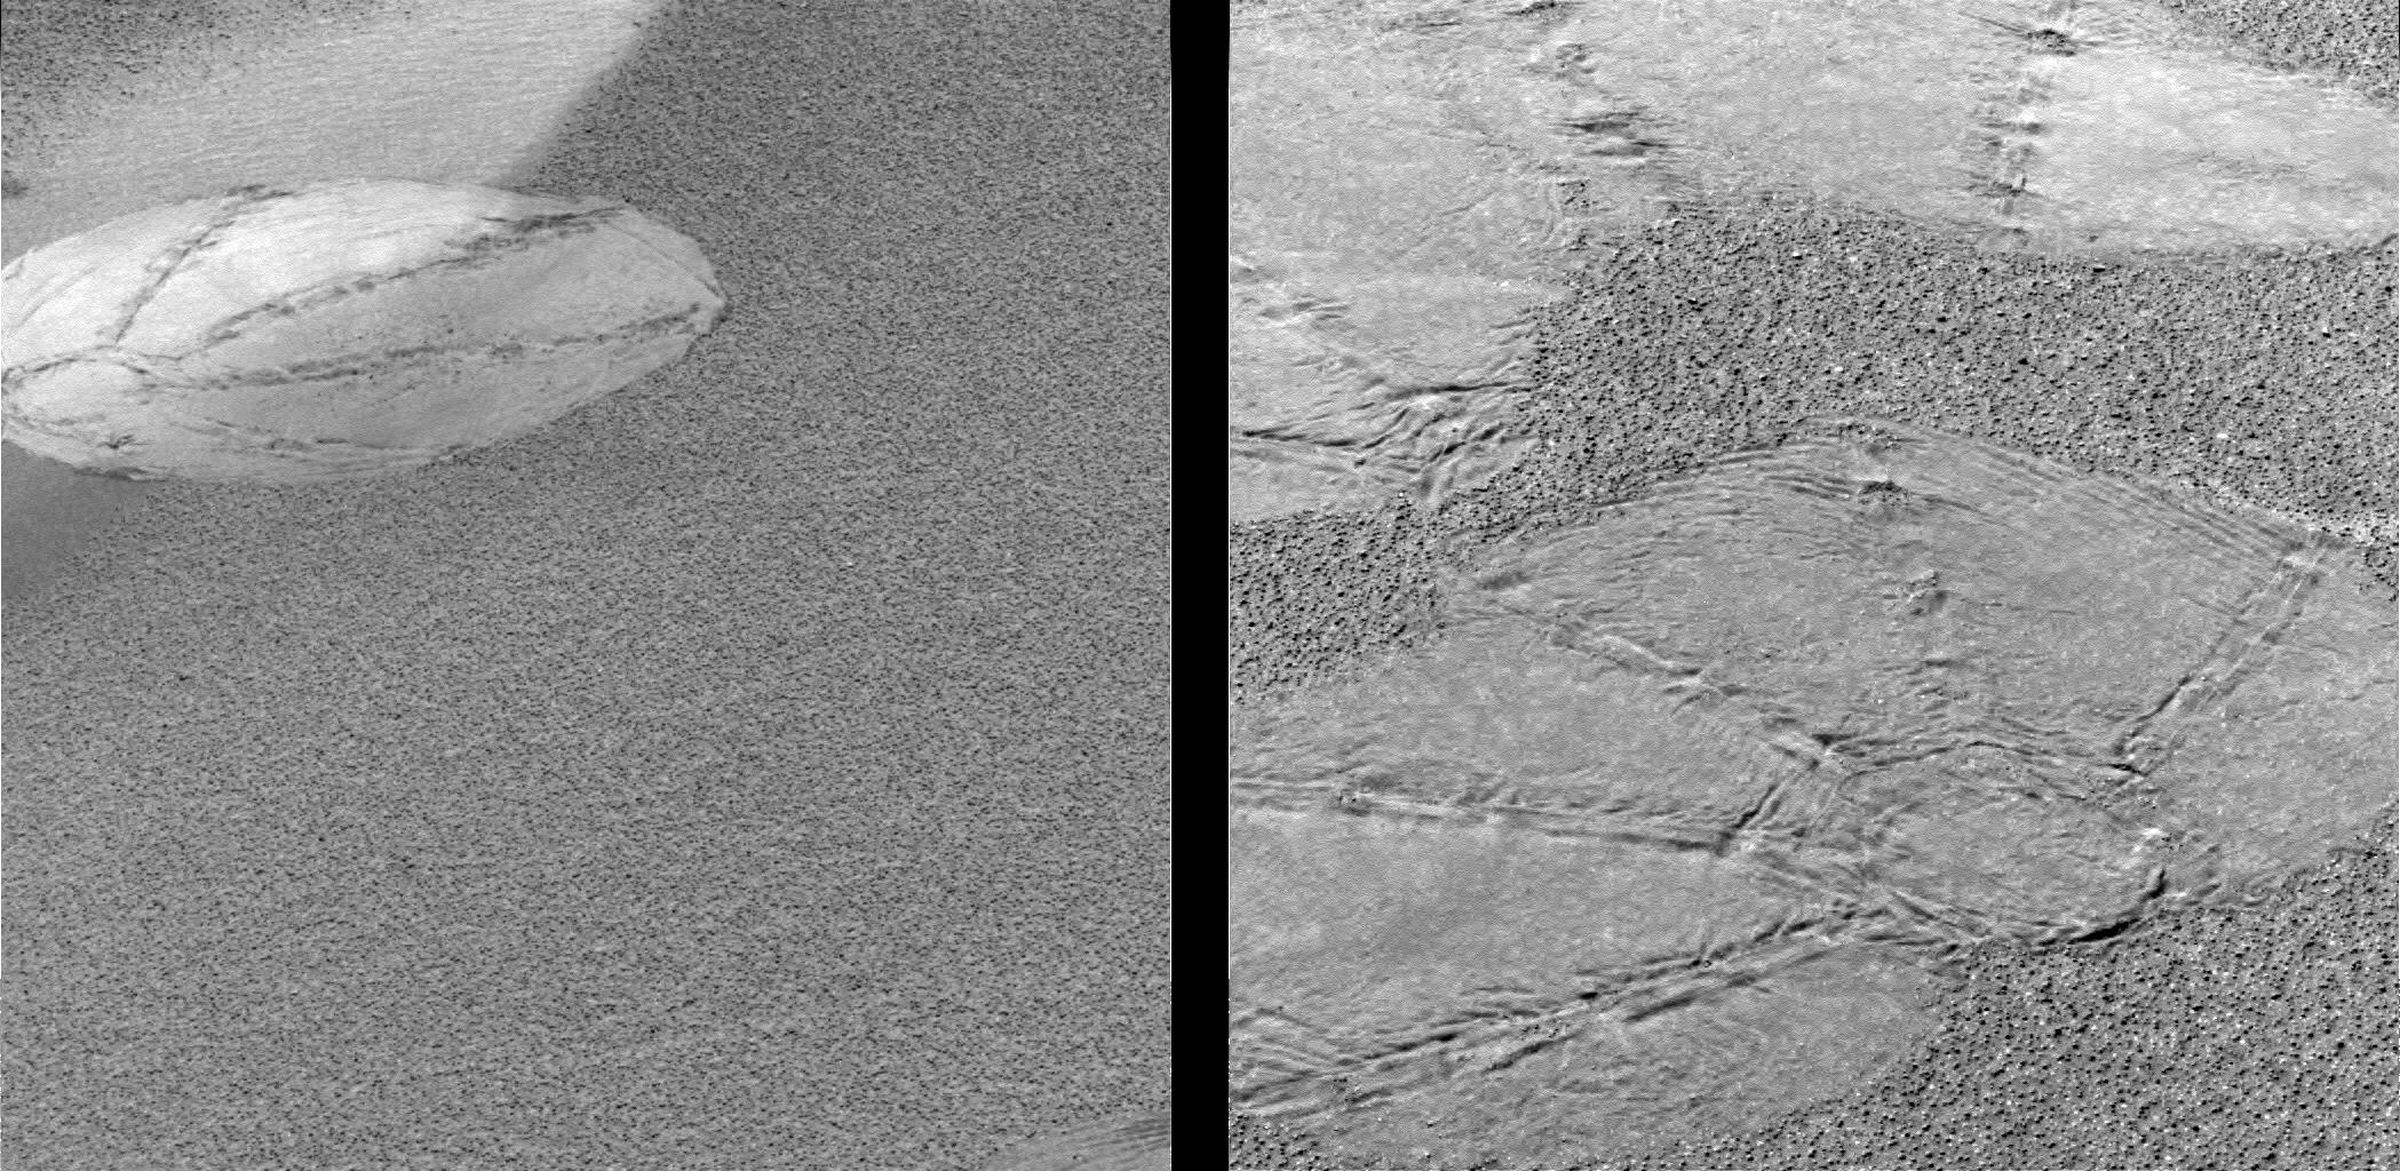 Instead of being lowered out of the sky by a sky crane like some of the later rovers, Opportunity and its twin, Spirit, had a rough landing. During descent, their “nests” were surrounded by circular airbags, and when they landed, they bounced along the surface. These are a few imprints from those airbags.